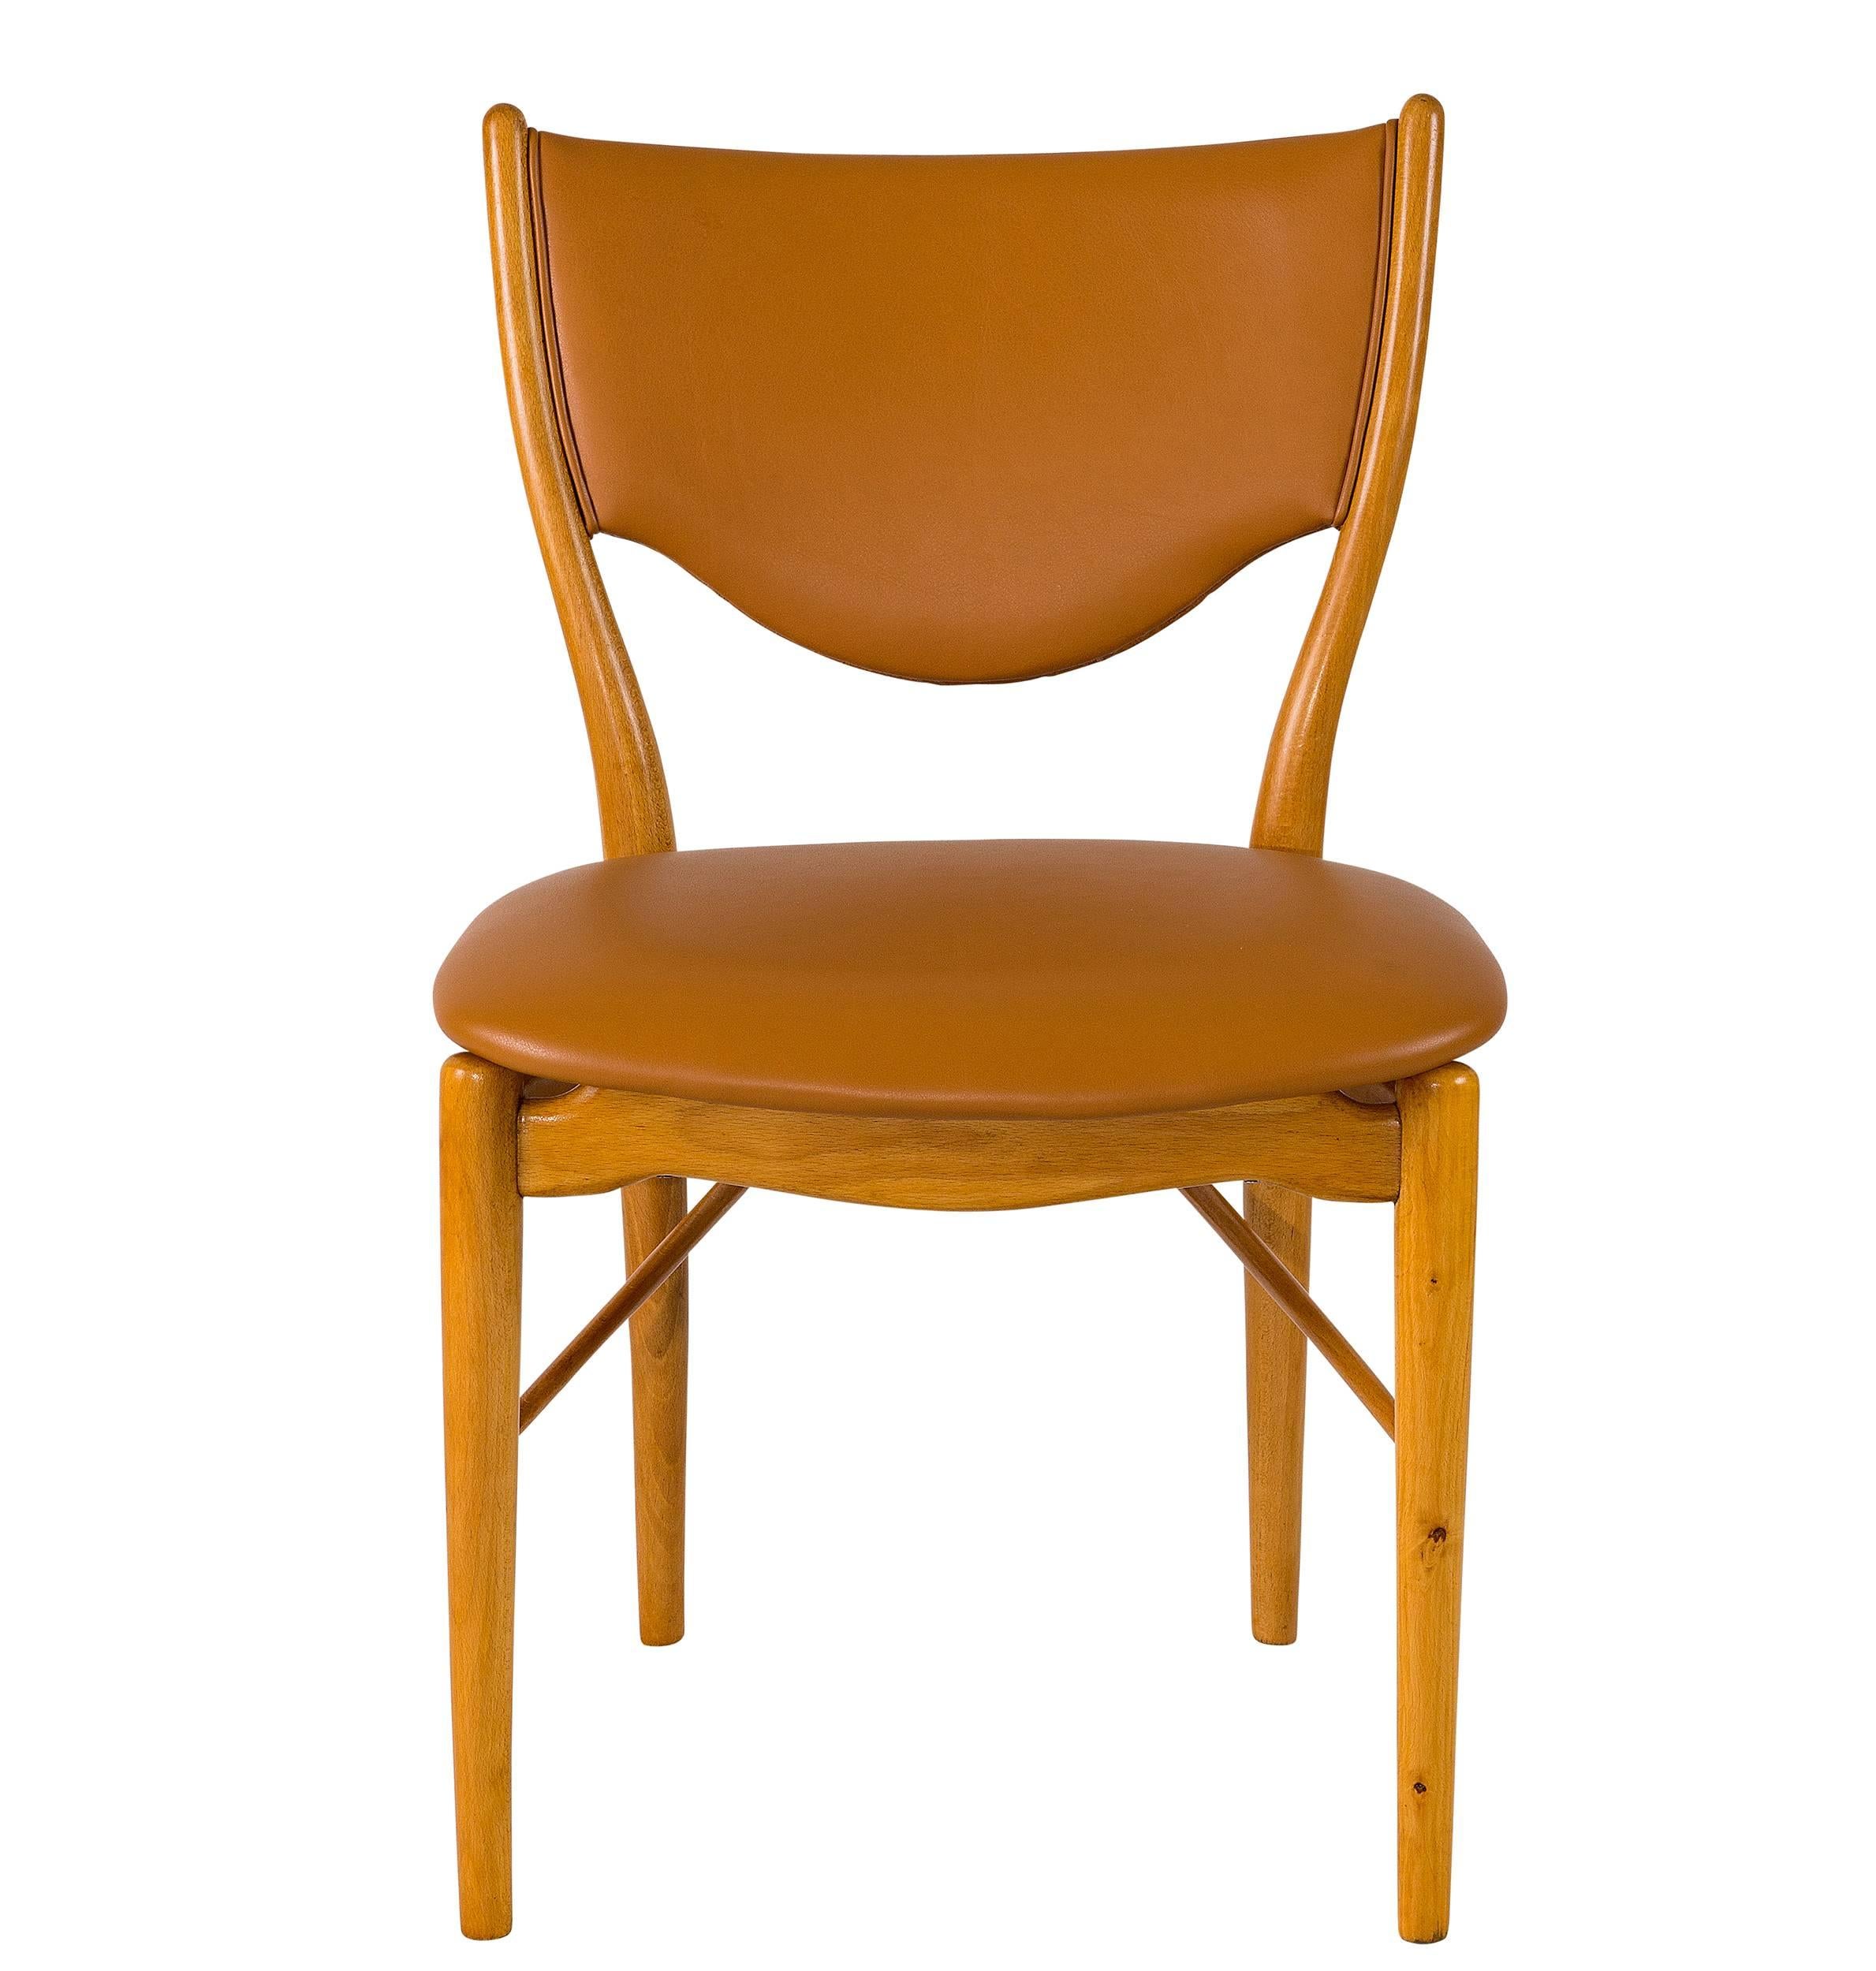 Set of 12 Finn Juhl BO-63 dining chairs designed in 1952 and produced by Bovirke.